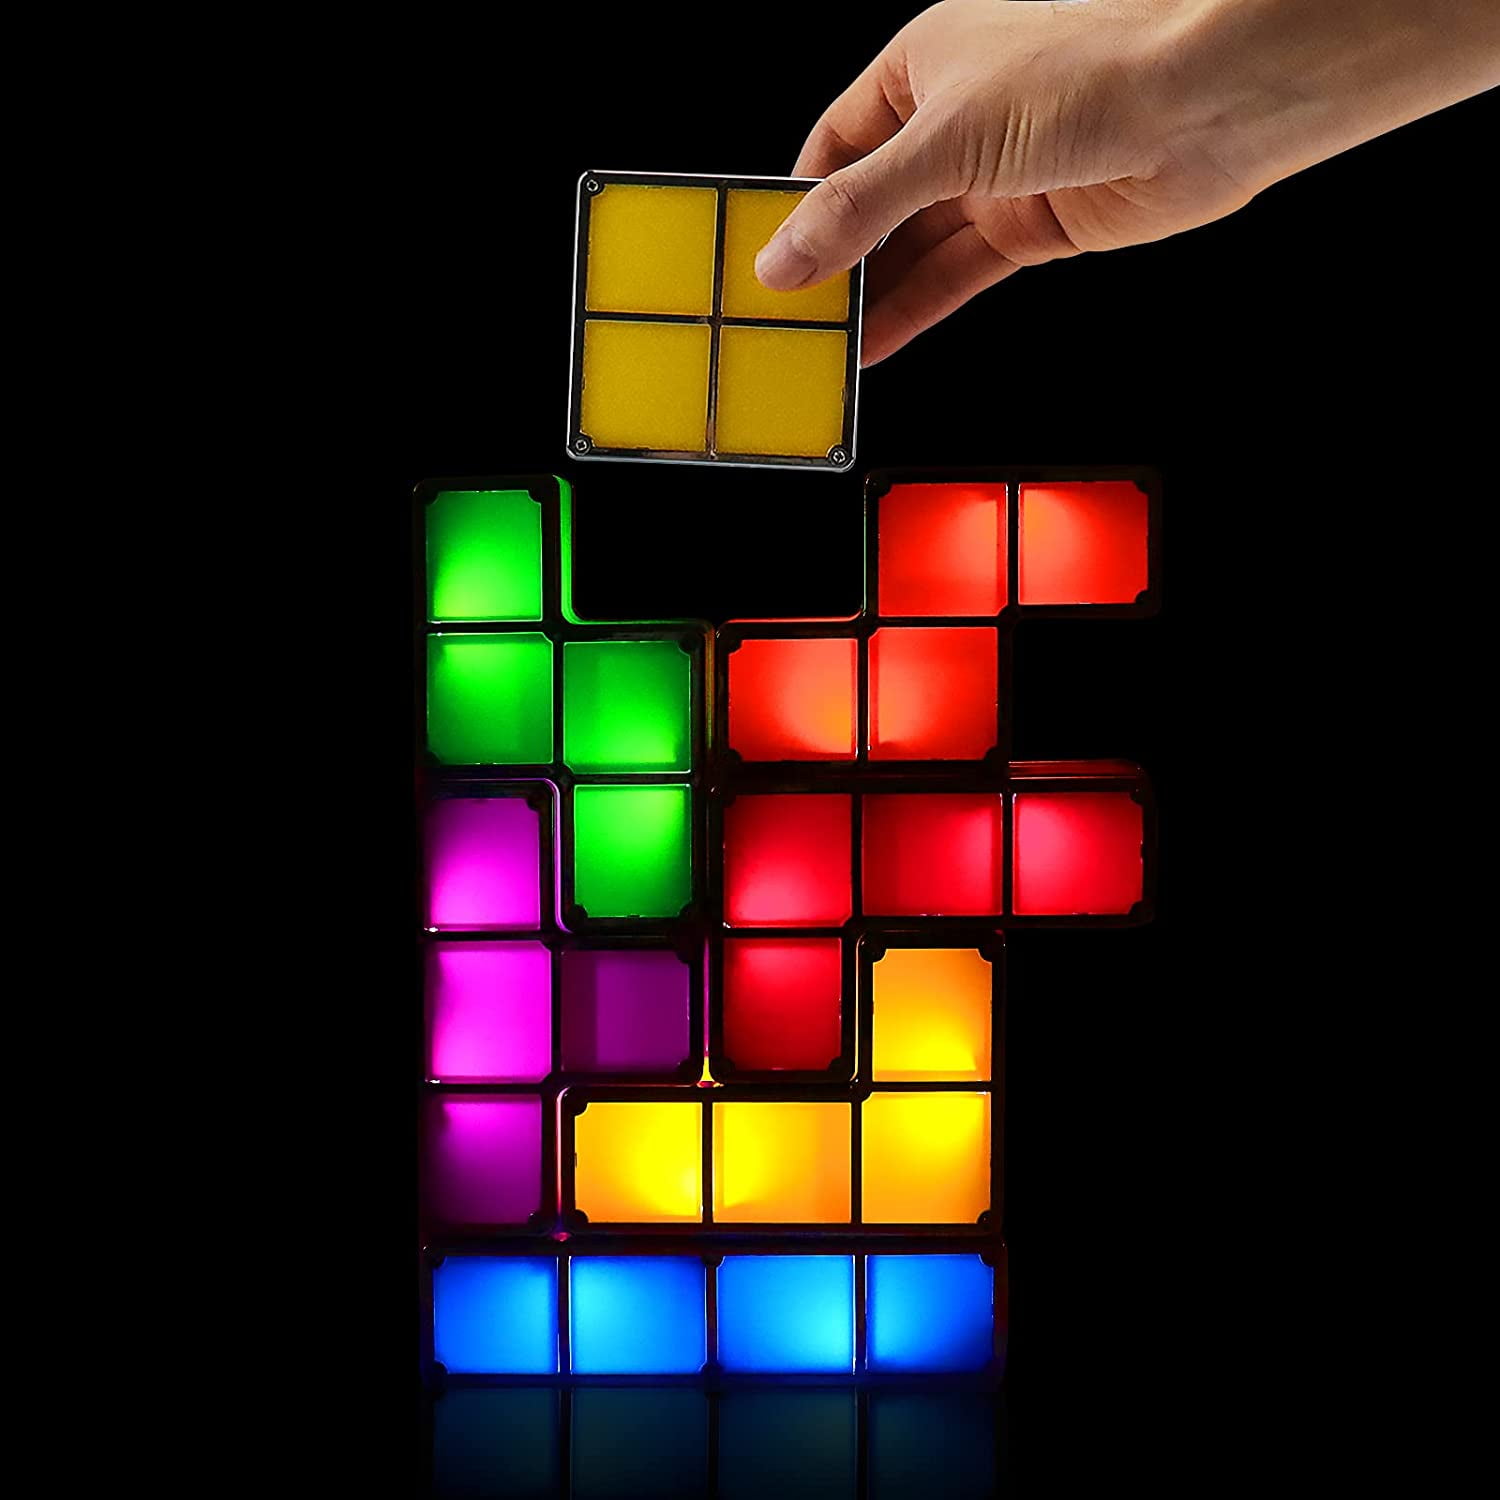 Night Light,DIY Stackable LED 7 Colors Interlocking Induction Novelty Desk Lamp,3D Puzzle Magic Light Bright Toy for Kids Teens,Gamer Decor Ideal Gift for Birthday Christmas Plug Walmart.com